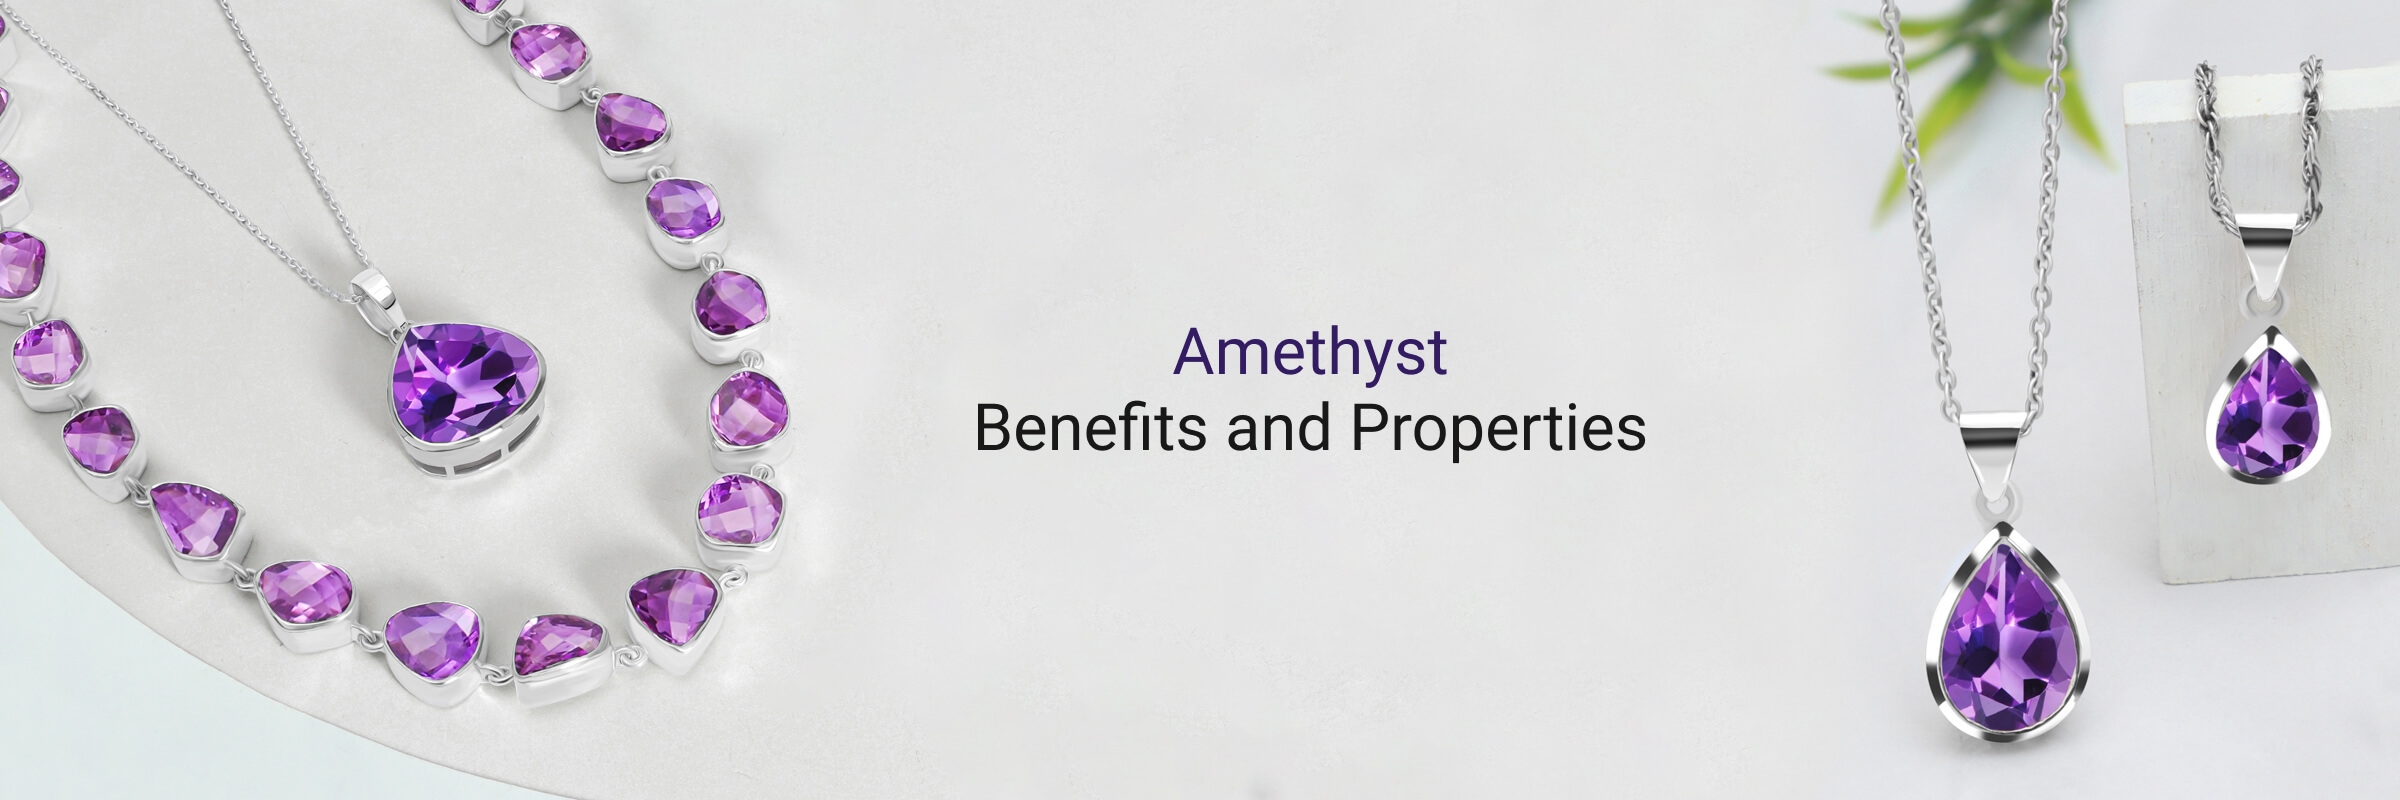 What are the properties of Amethyst? What are its benefits?